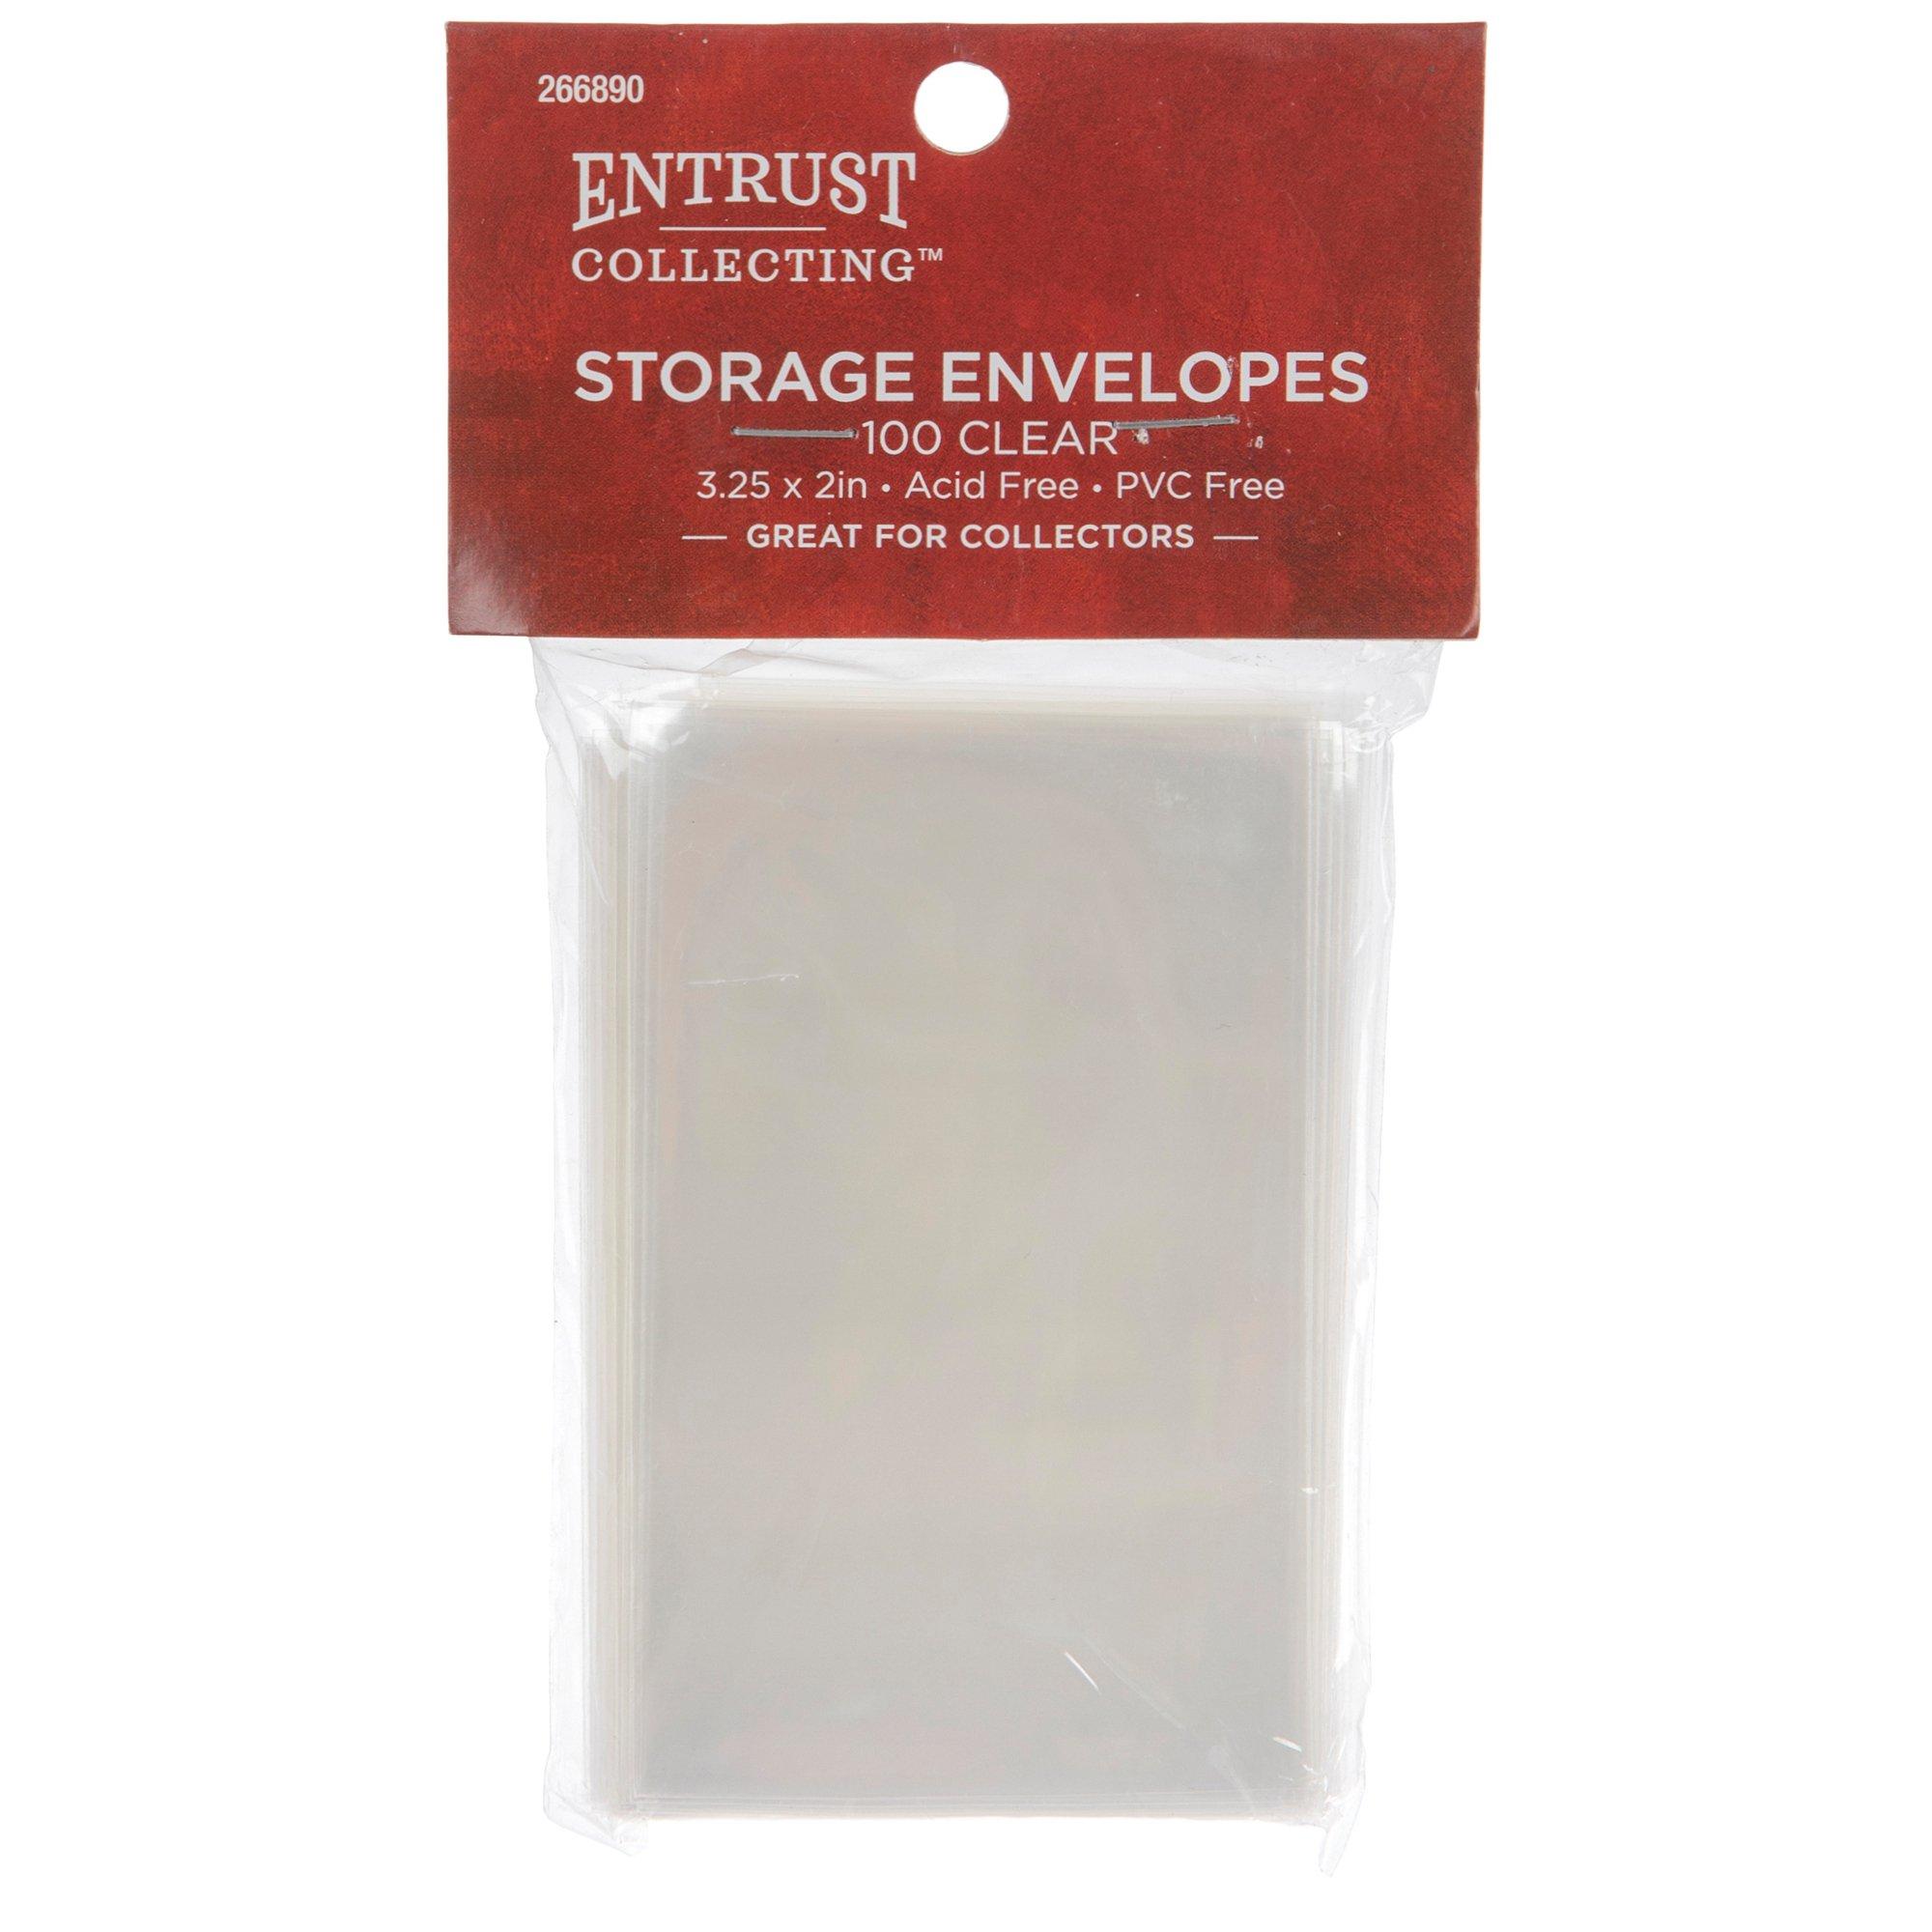 Coin Envelopes And Their Guides To Sizes, Storage, And More